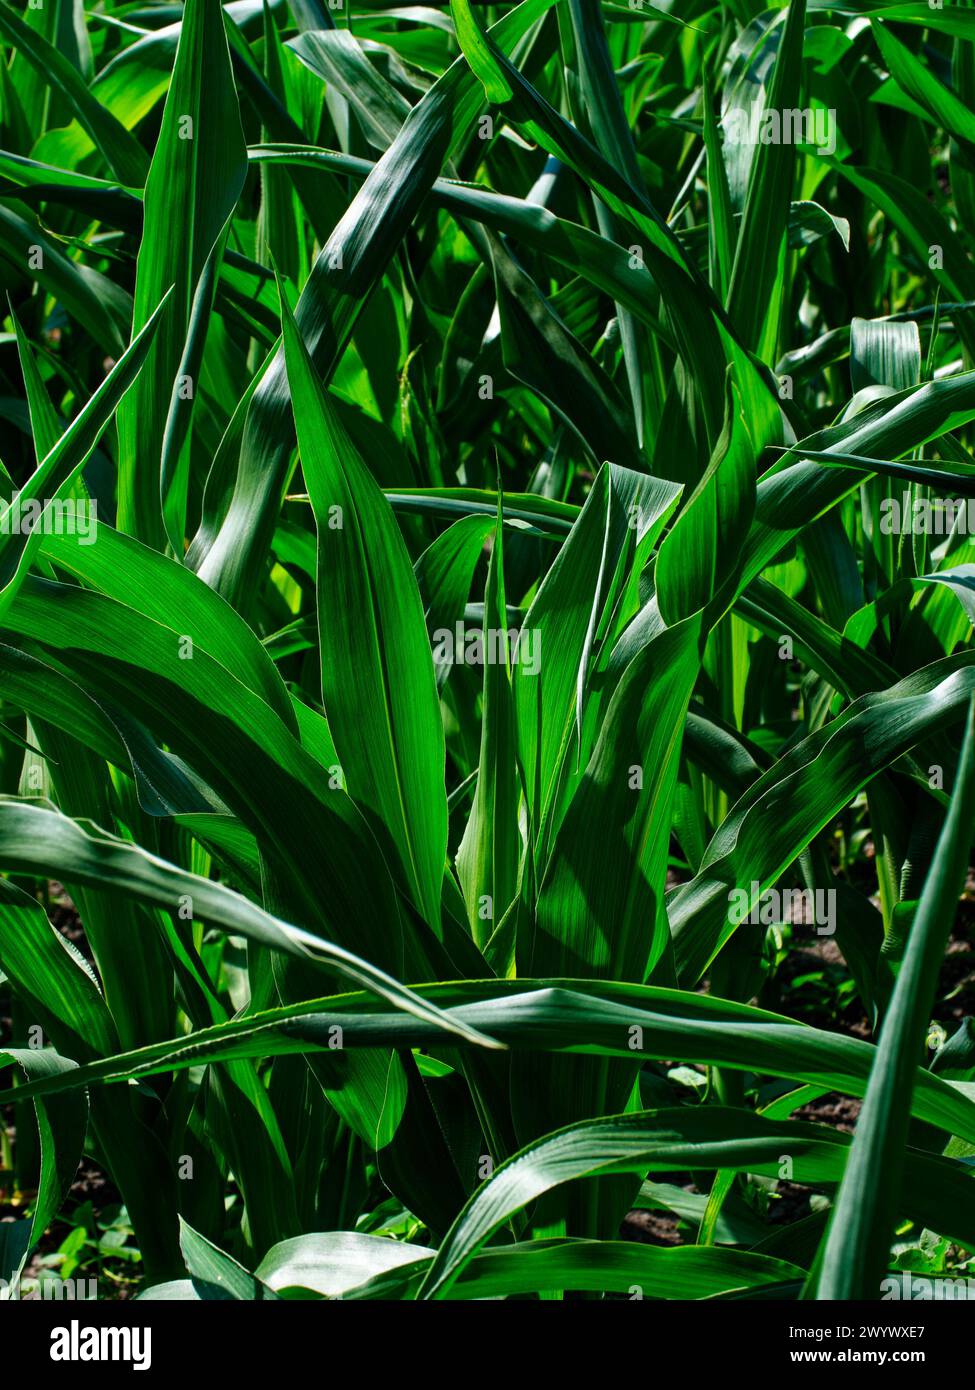 Abundant Harvest: Corn leaves bask in the sun, their vivid green hues and textures symbolizing agricultural abundance. Stock Photo